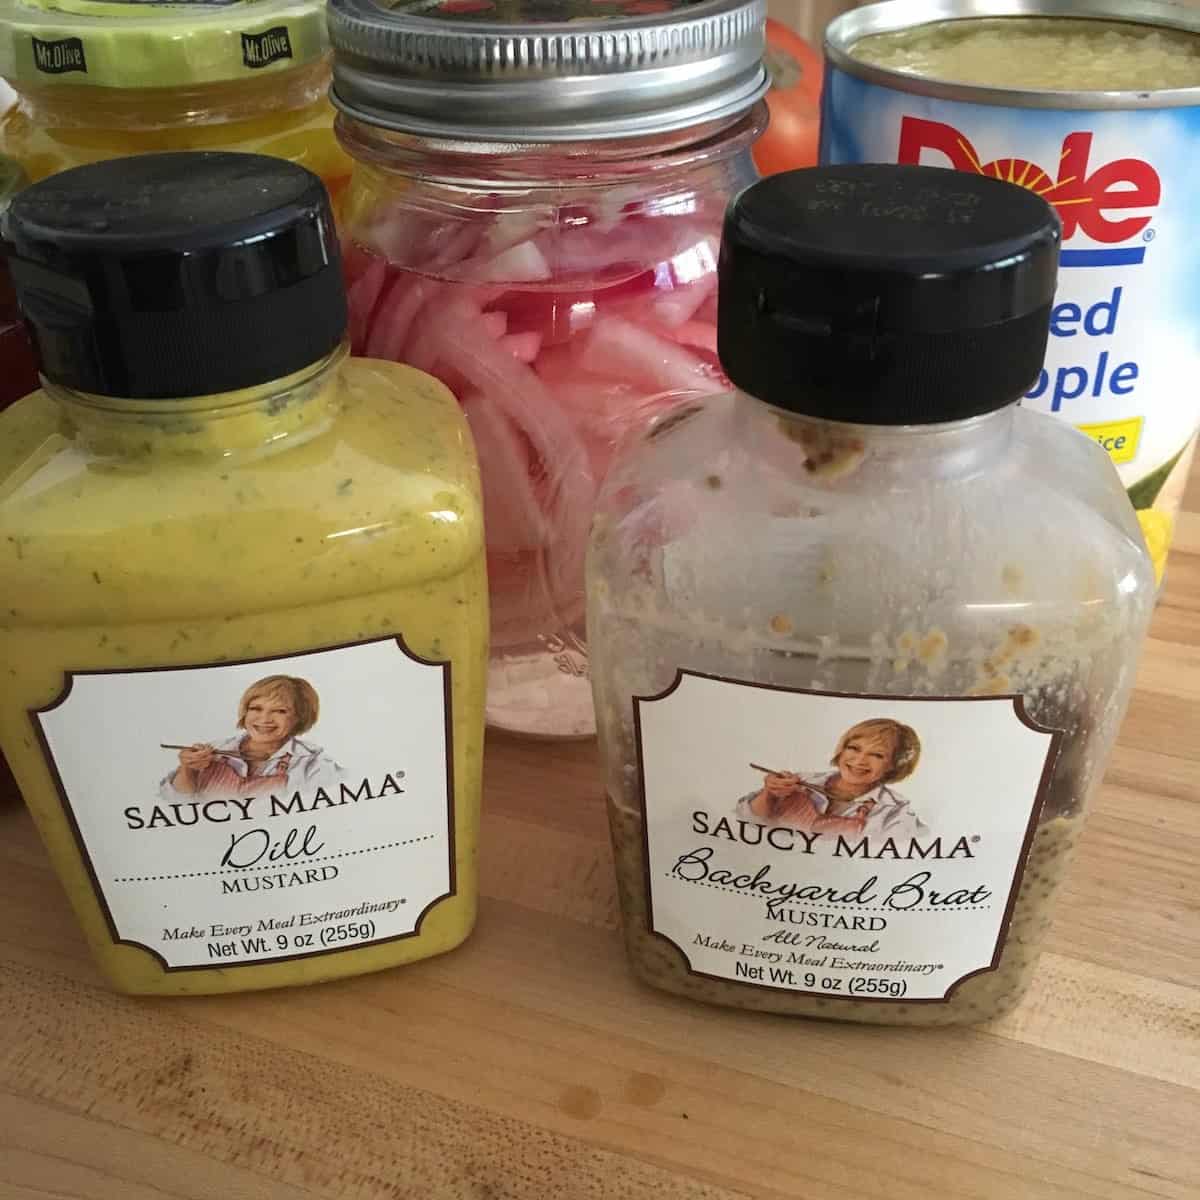 saucy mama mustard jars, pickled onions and pineapple